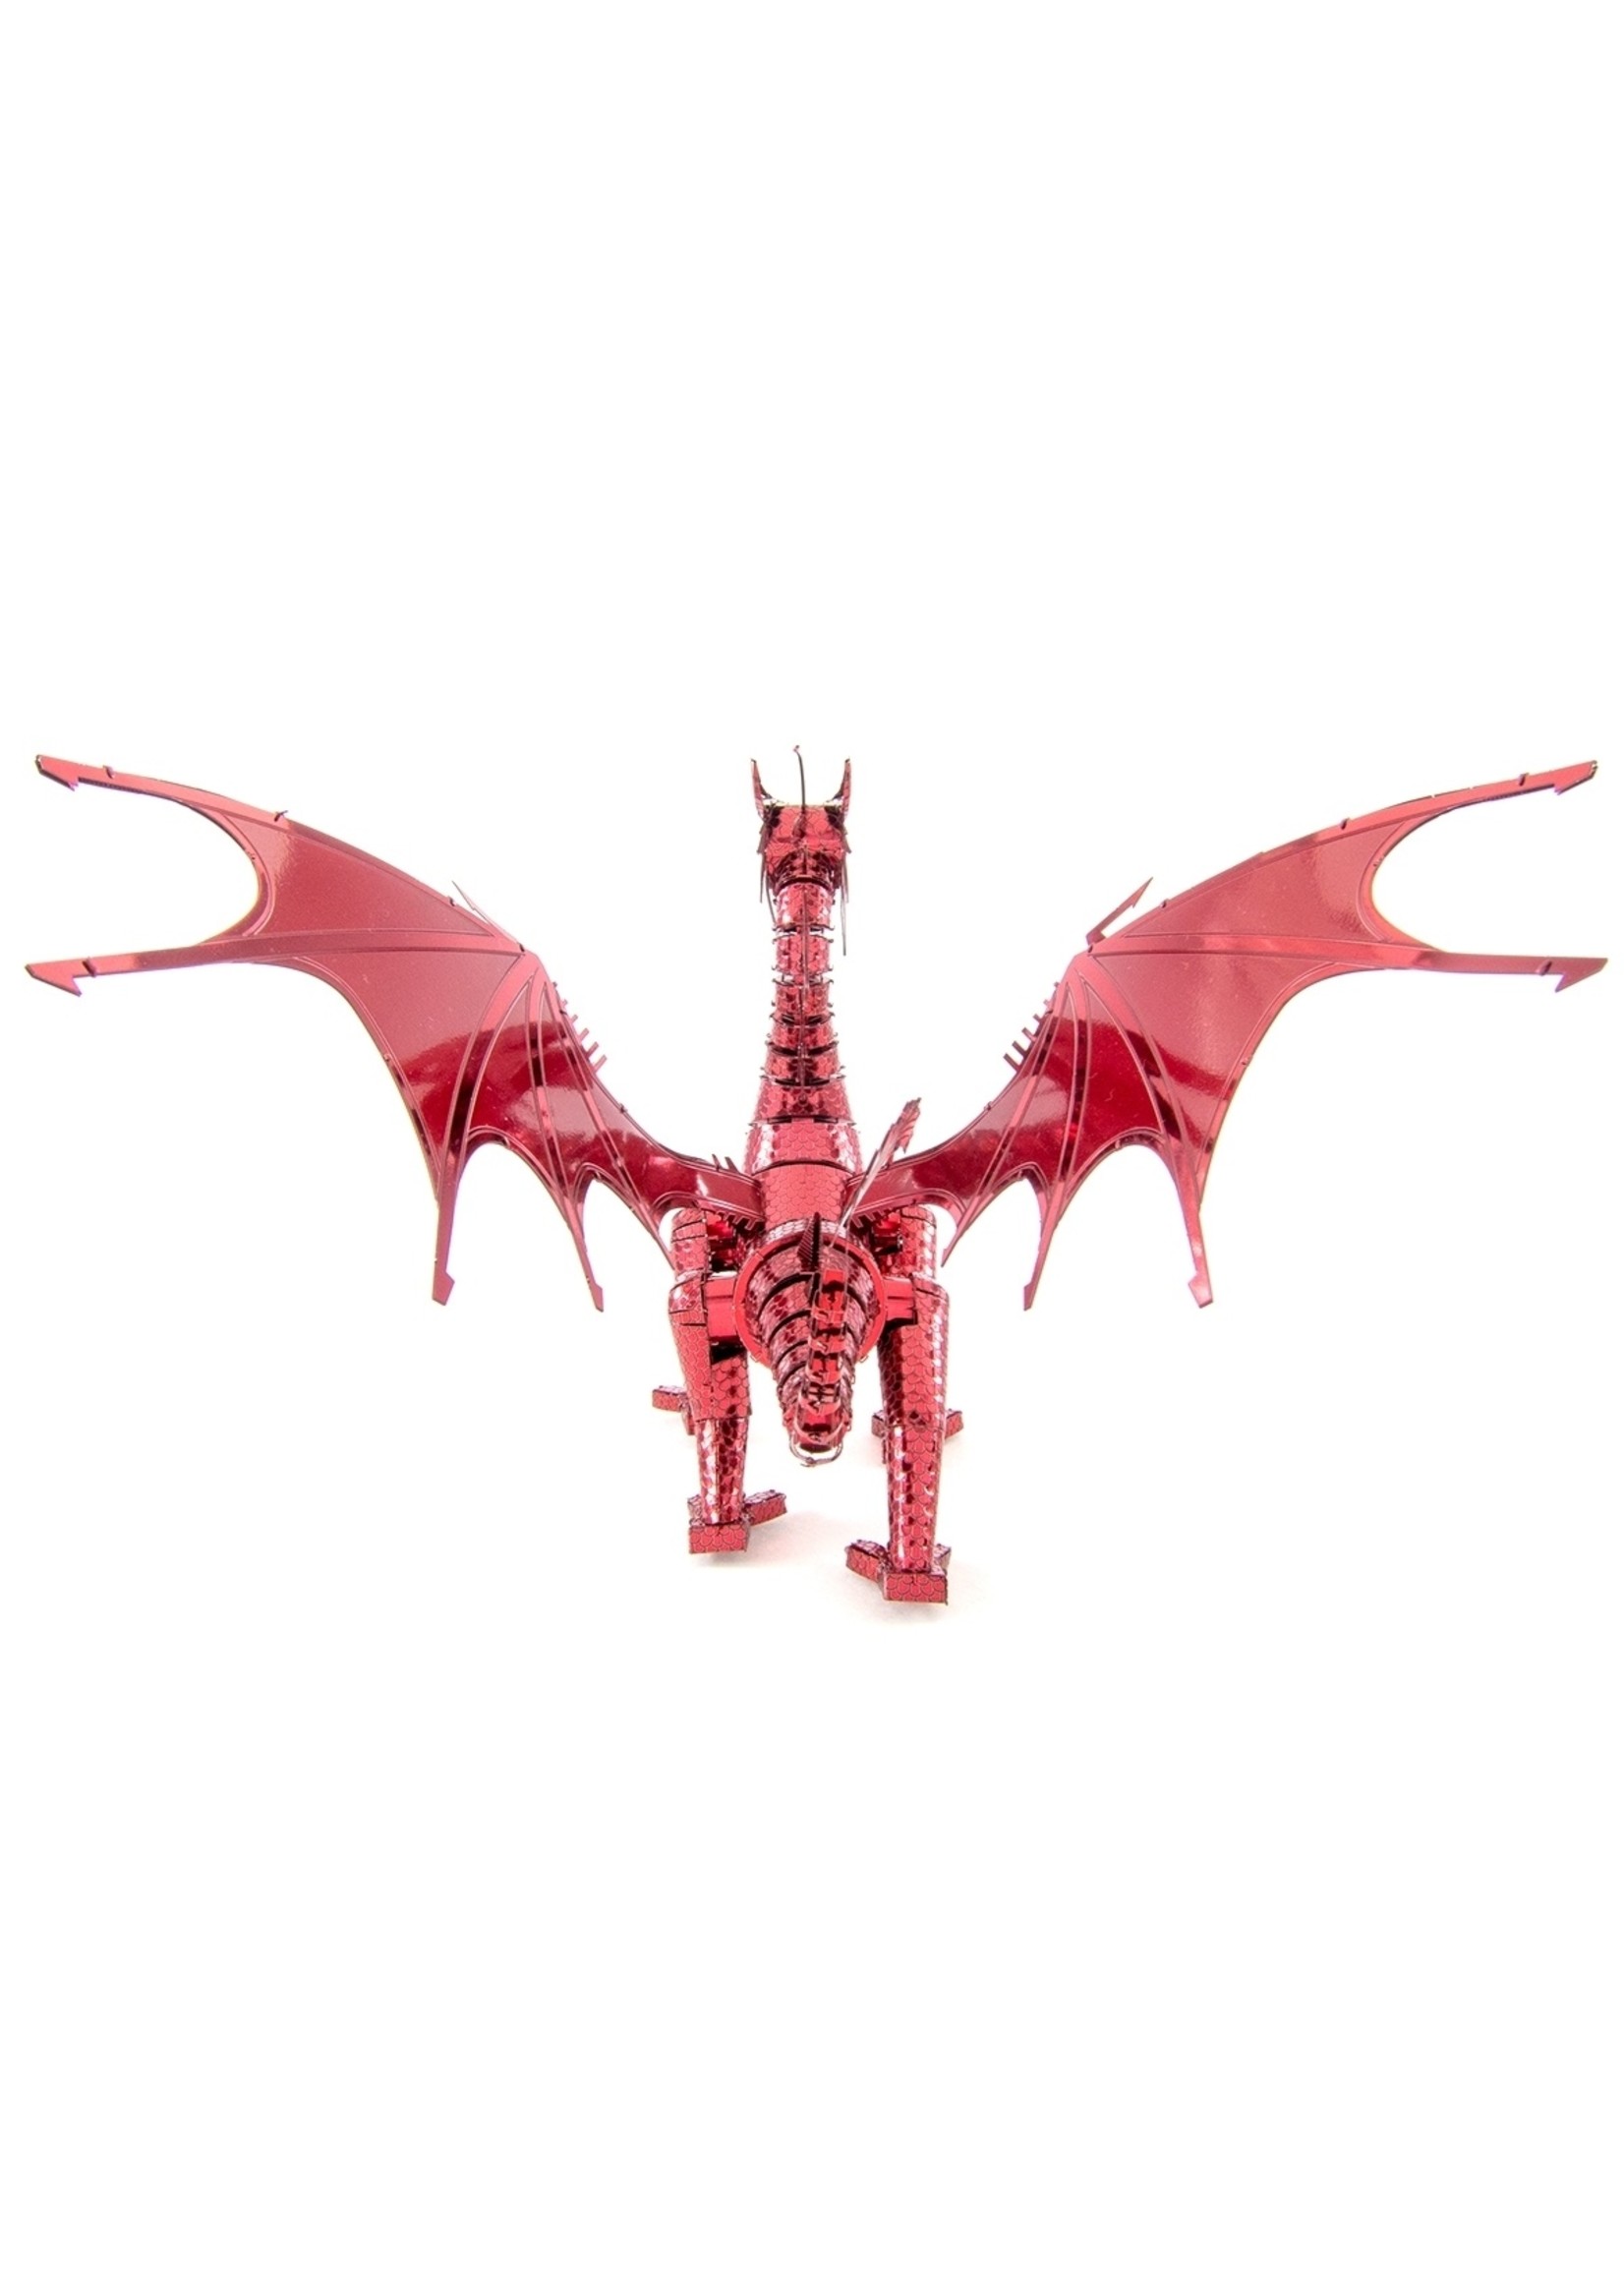 Fascinations Metal Earth - Red Dragon ICX